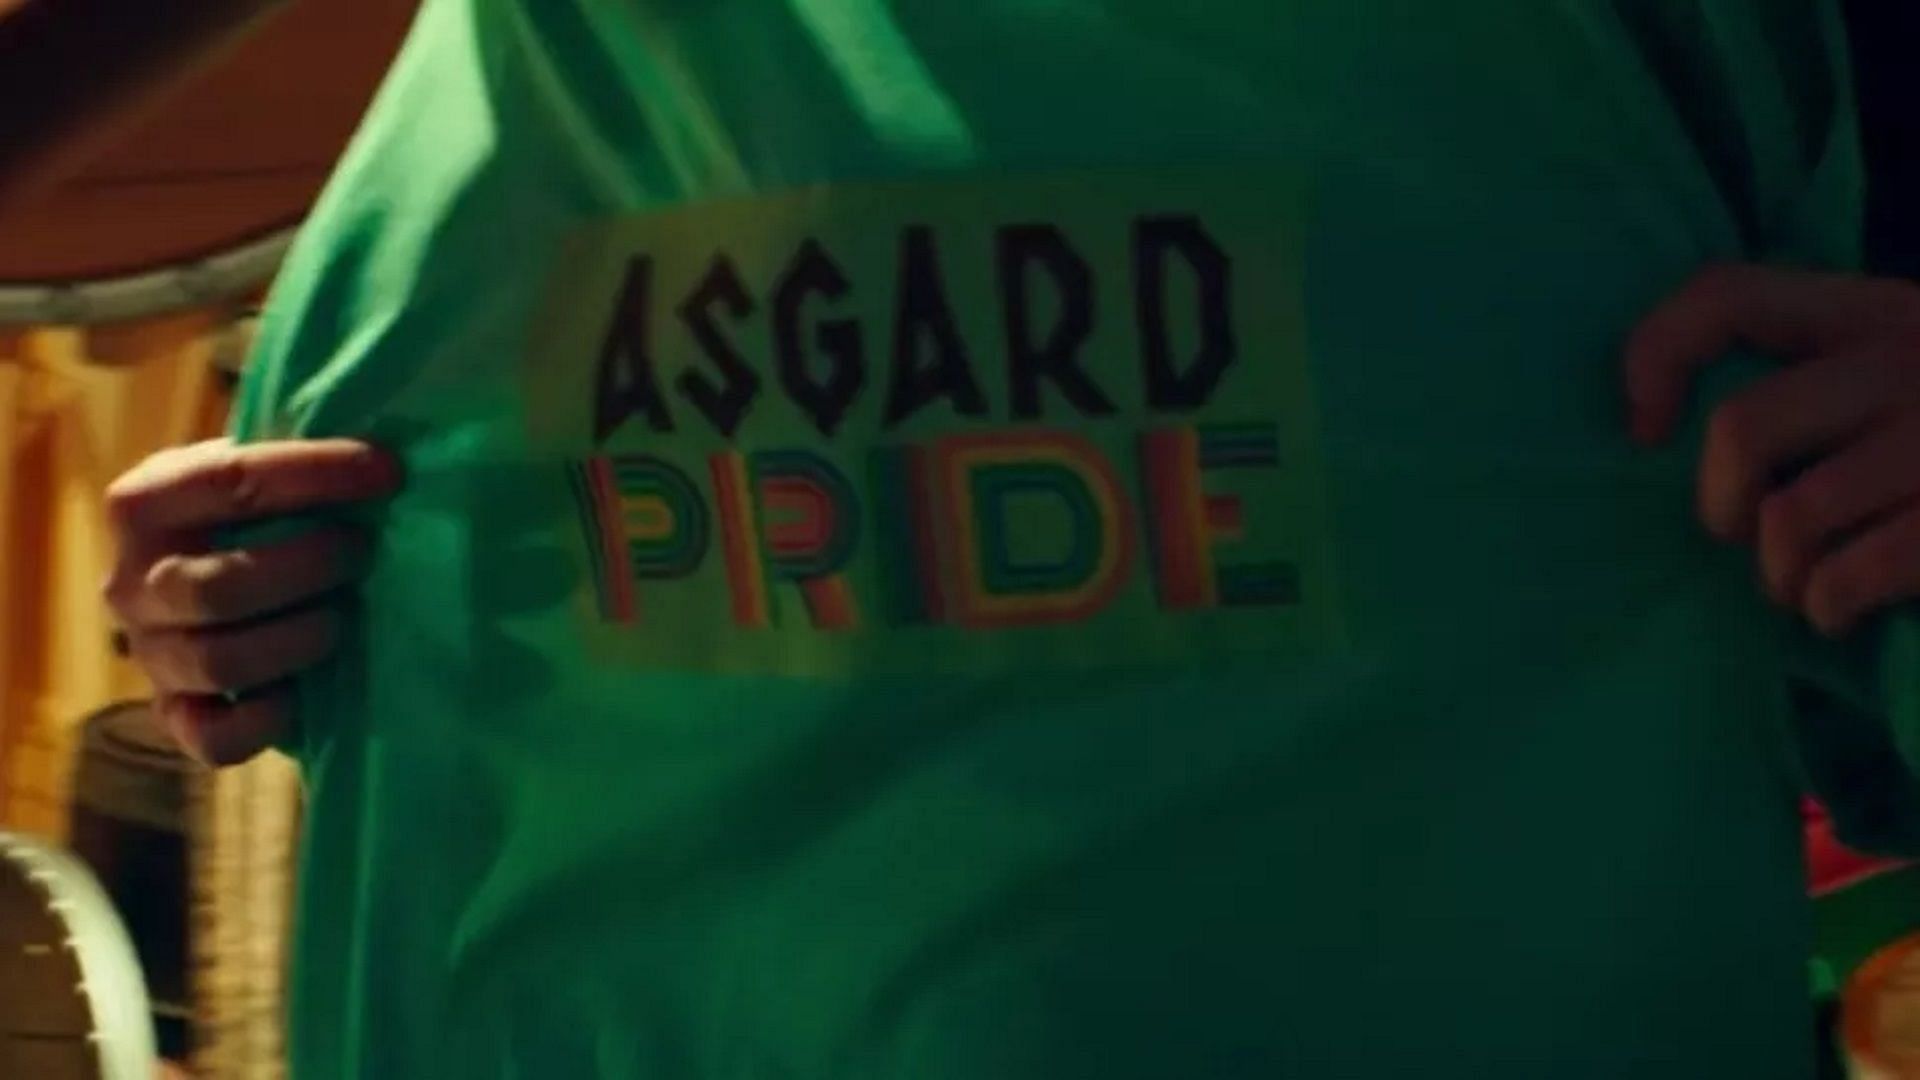 Asgard Pride is a reference to Valkyrie (Image via Disney+)